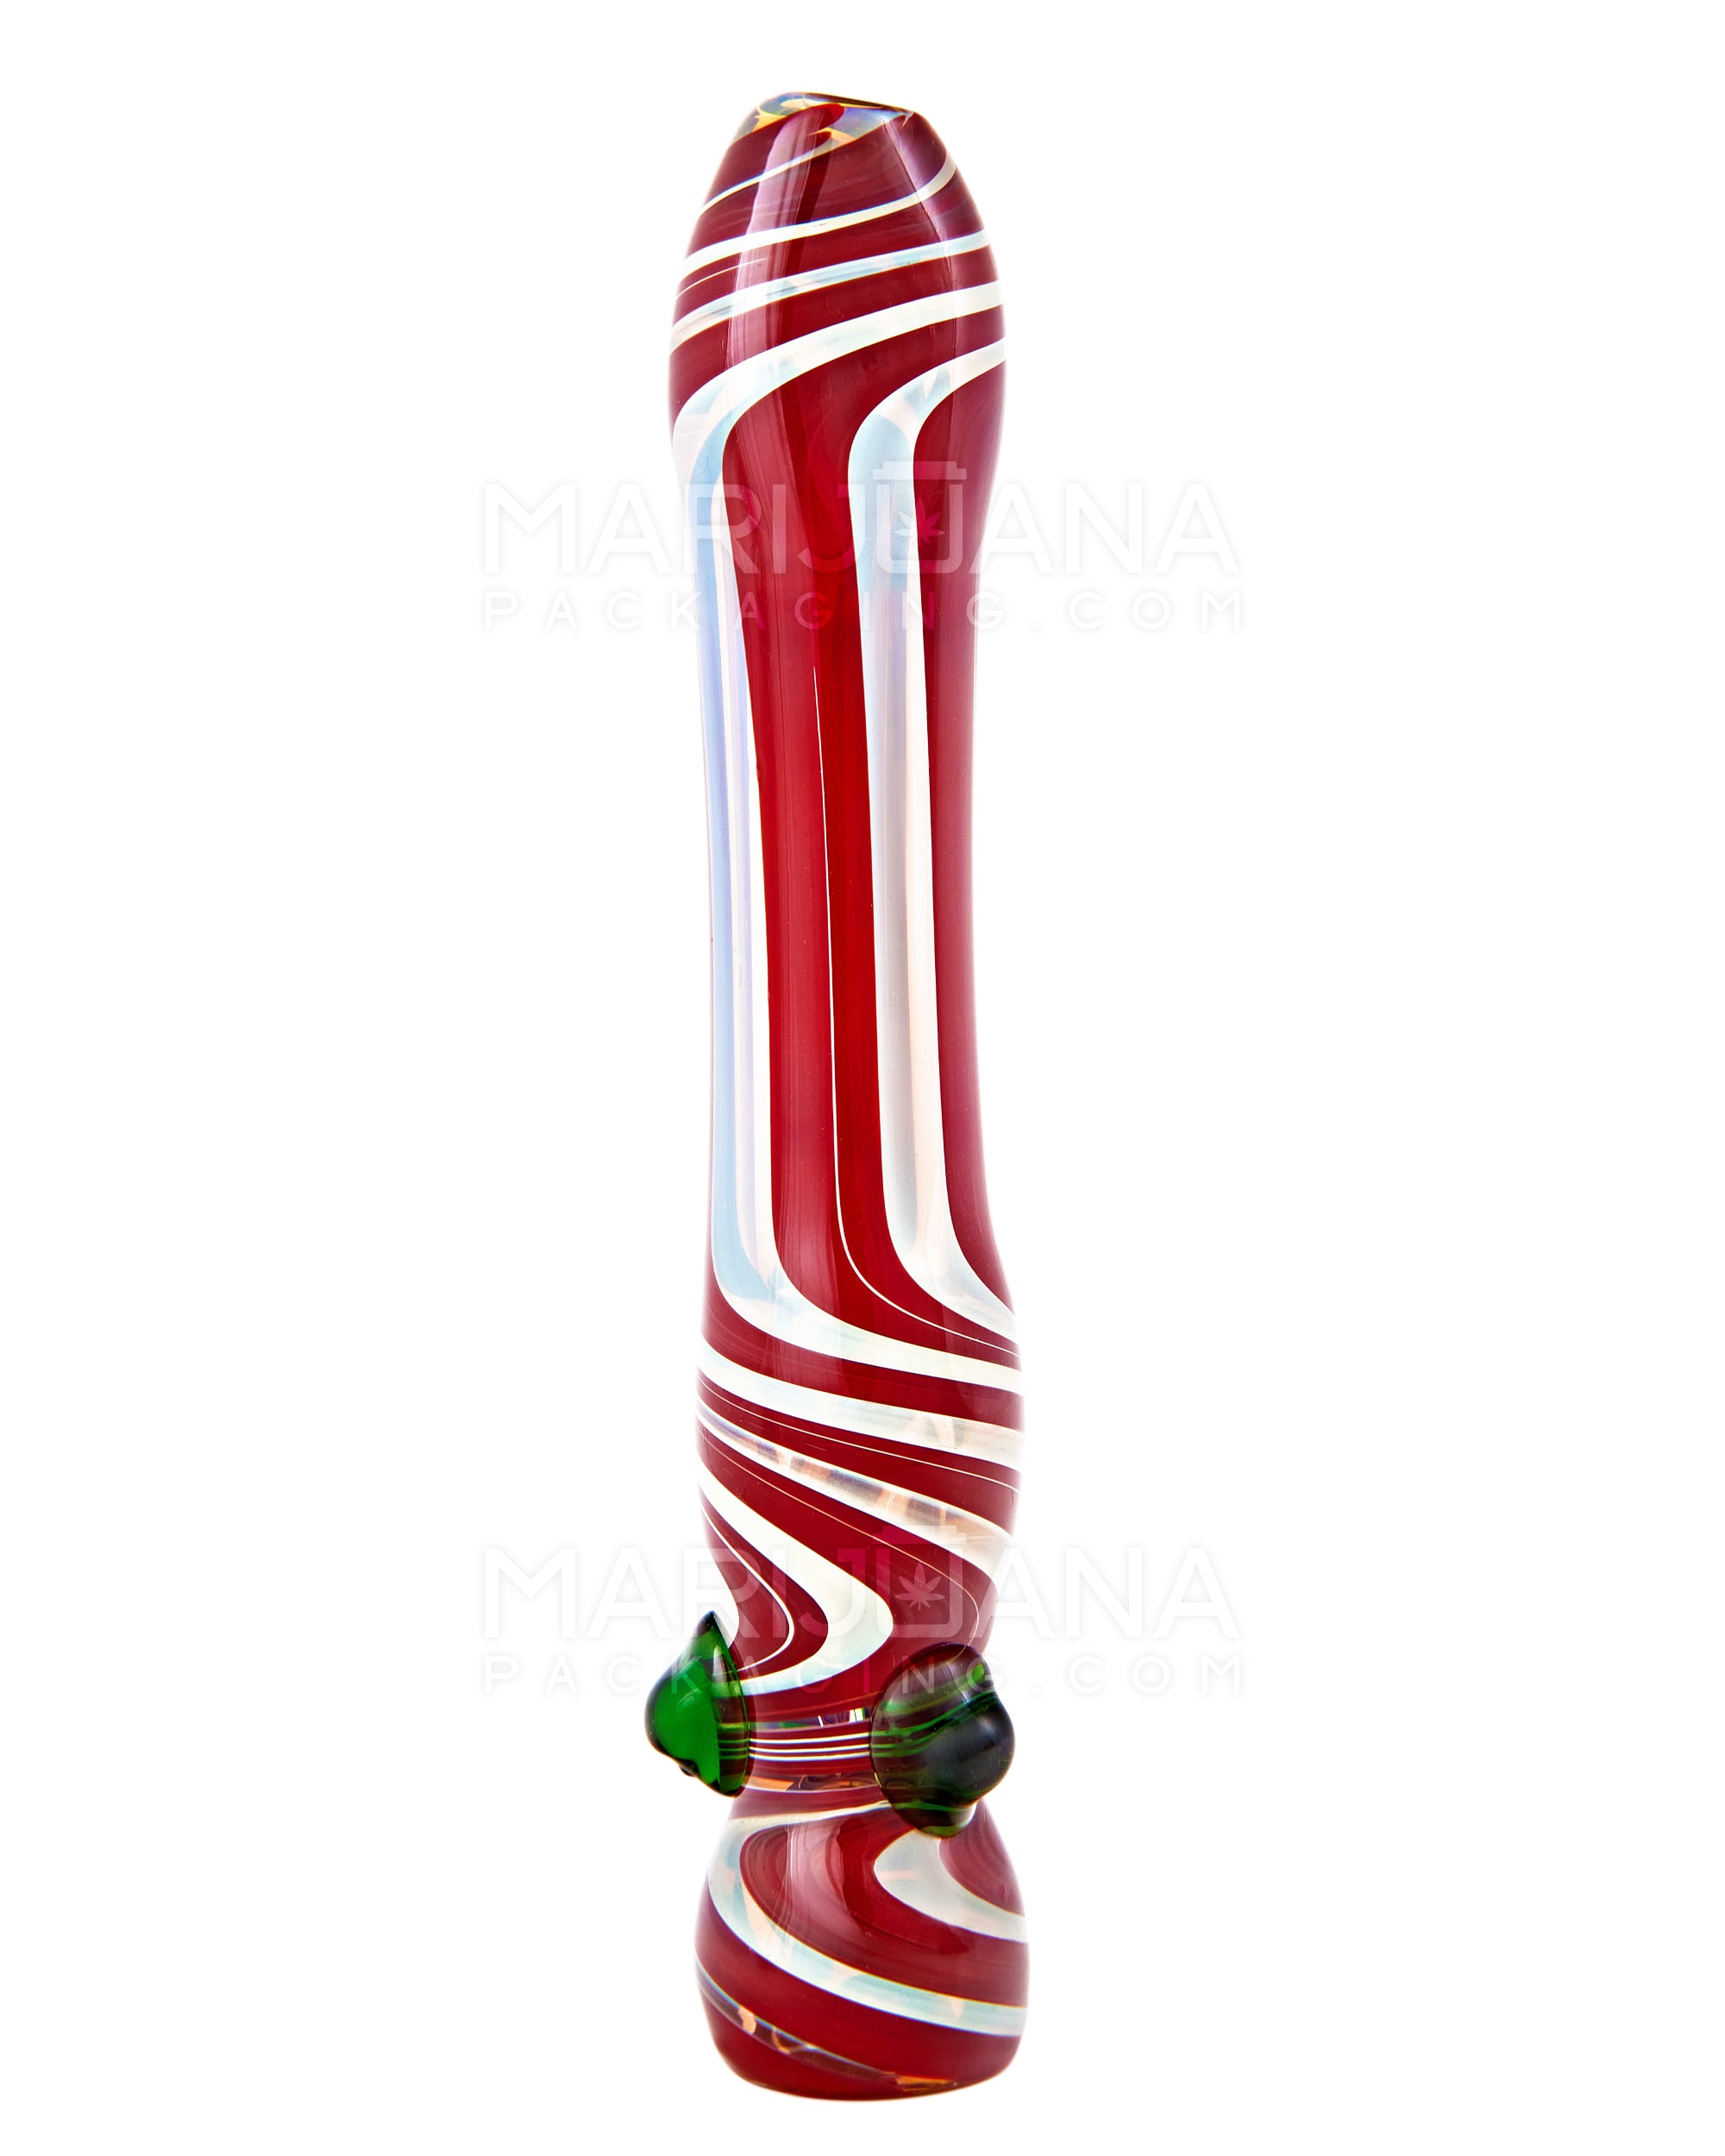 USA Glass | Swirl & Gold Fumed Chillum Hand Pipe w/ Triple Knockers | 3.5in Long - Glass - Assorted - 1